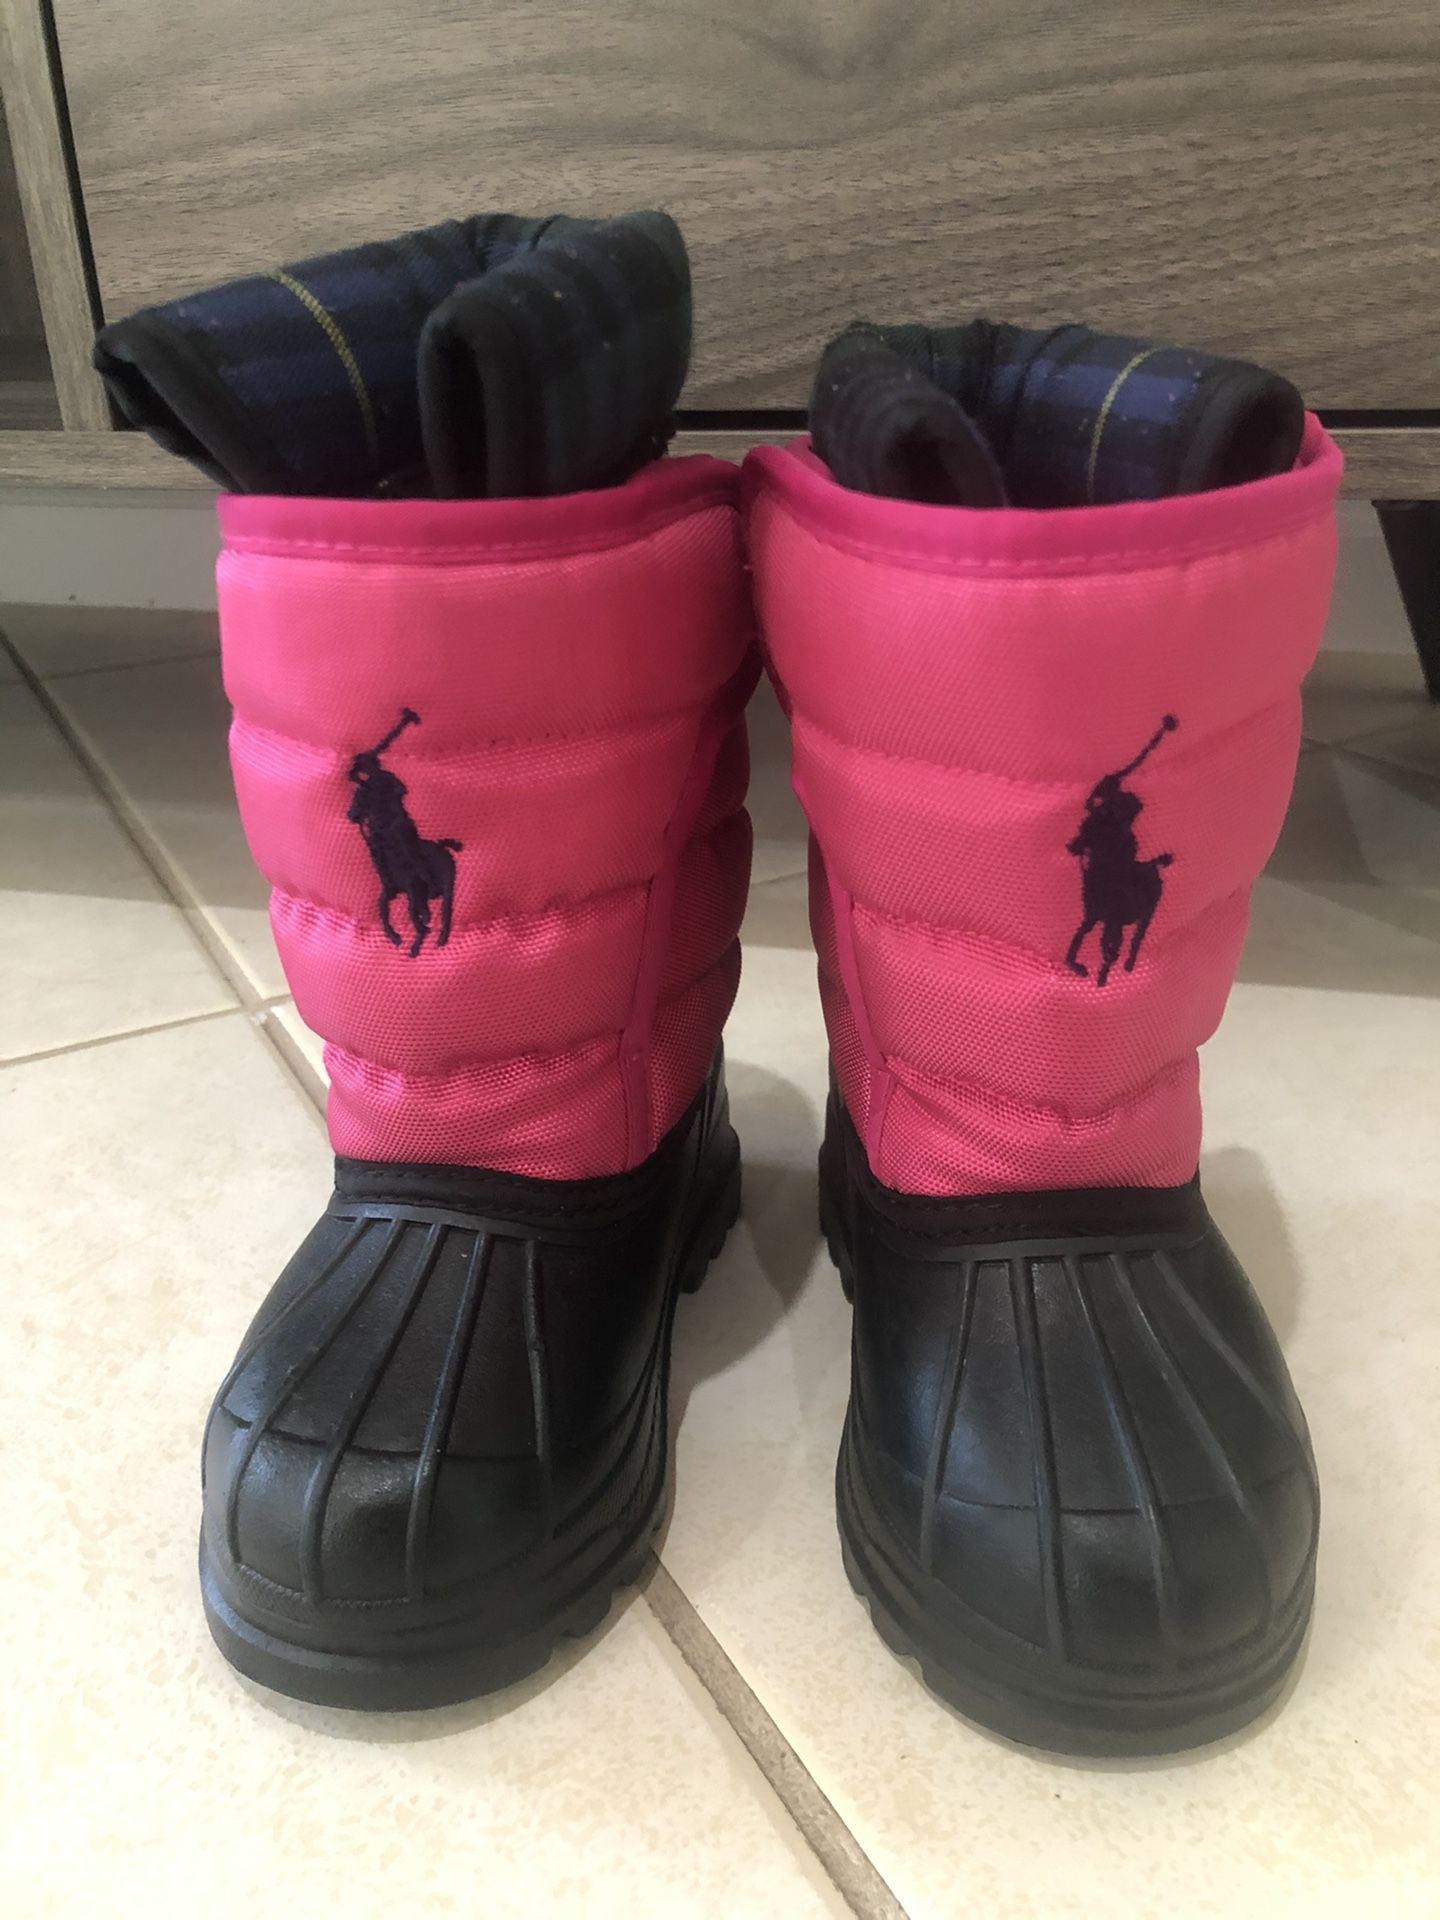 Polo snow boots for toddlers size 4